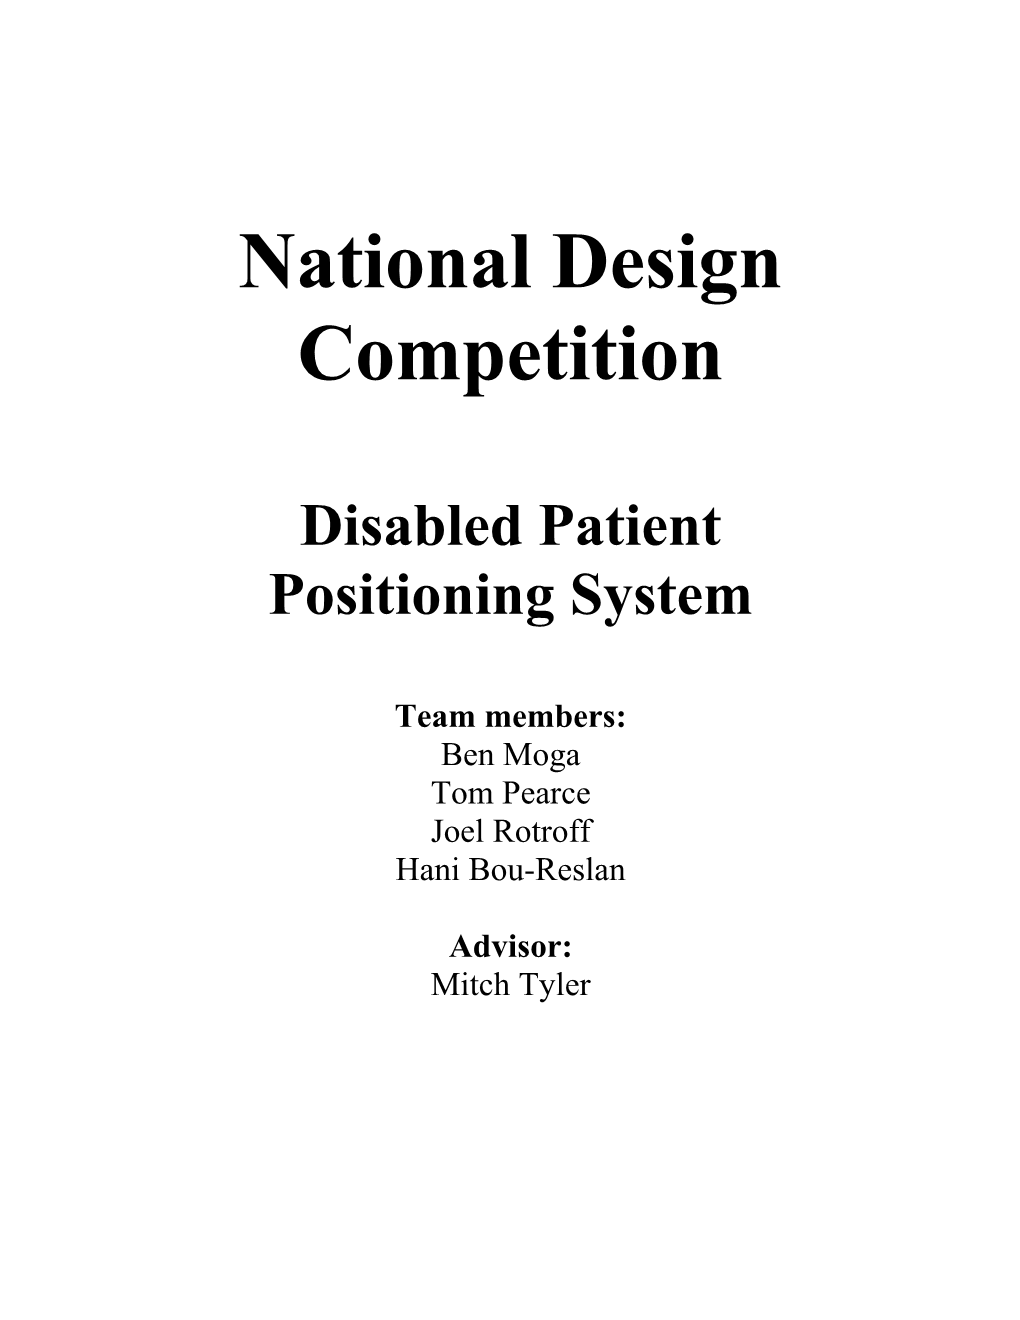 National Design Competition